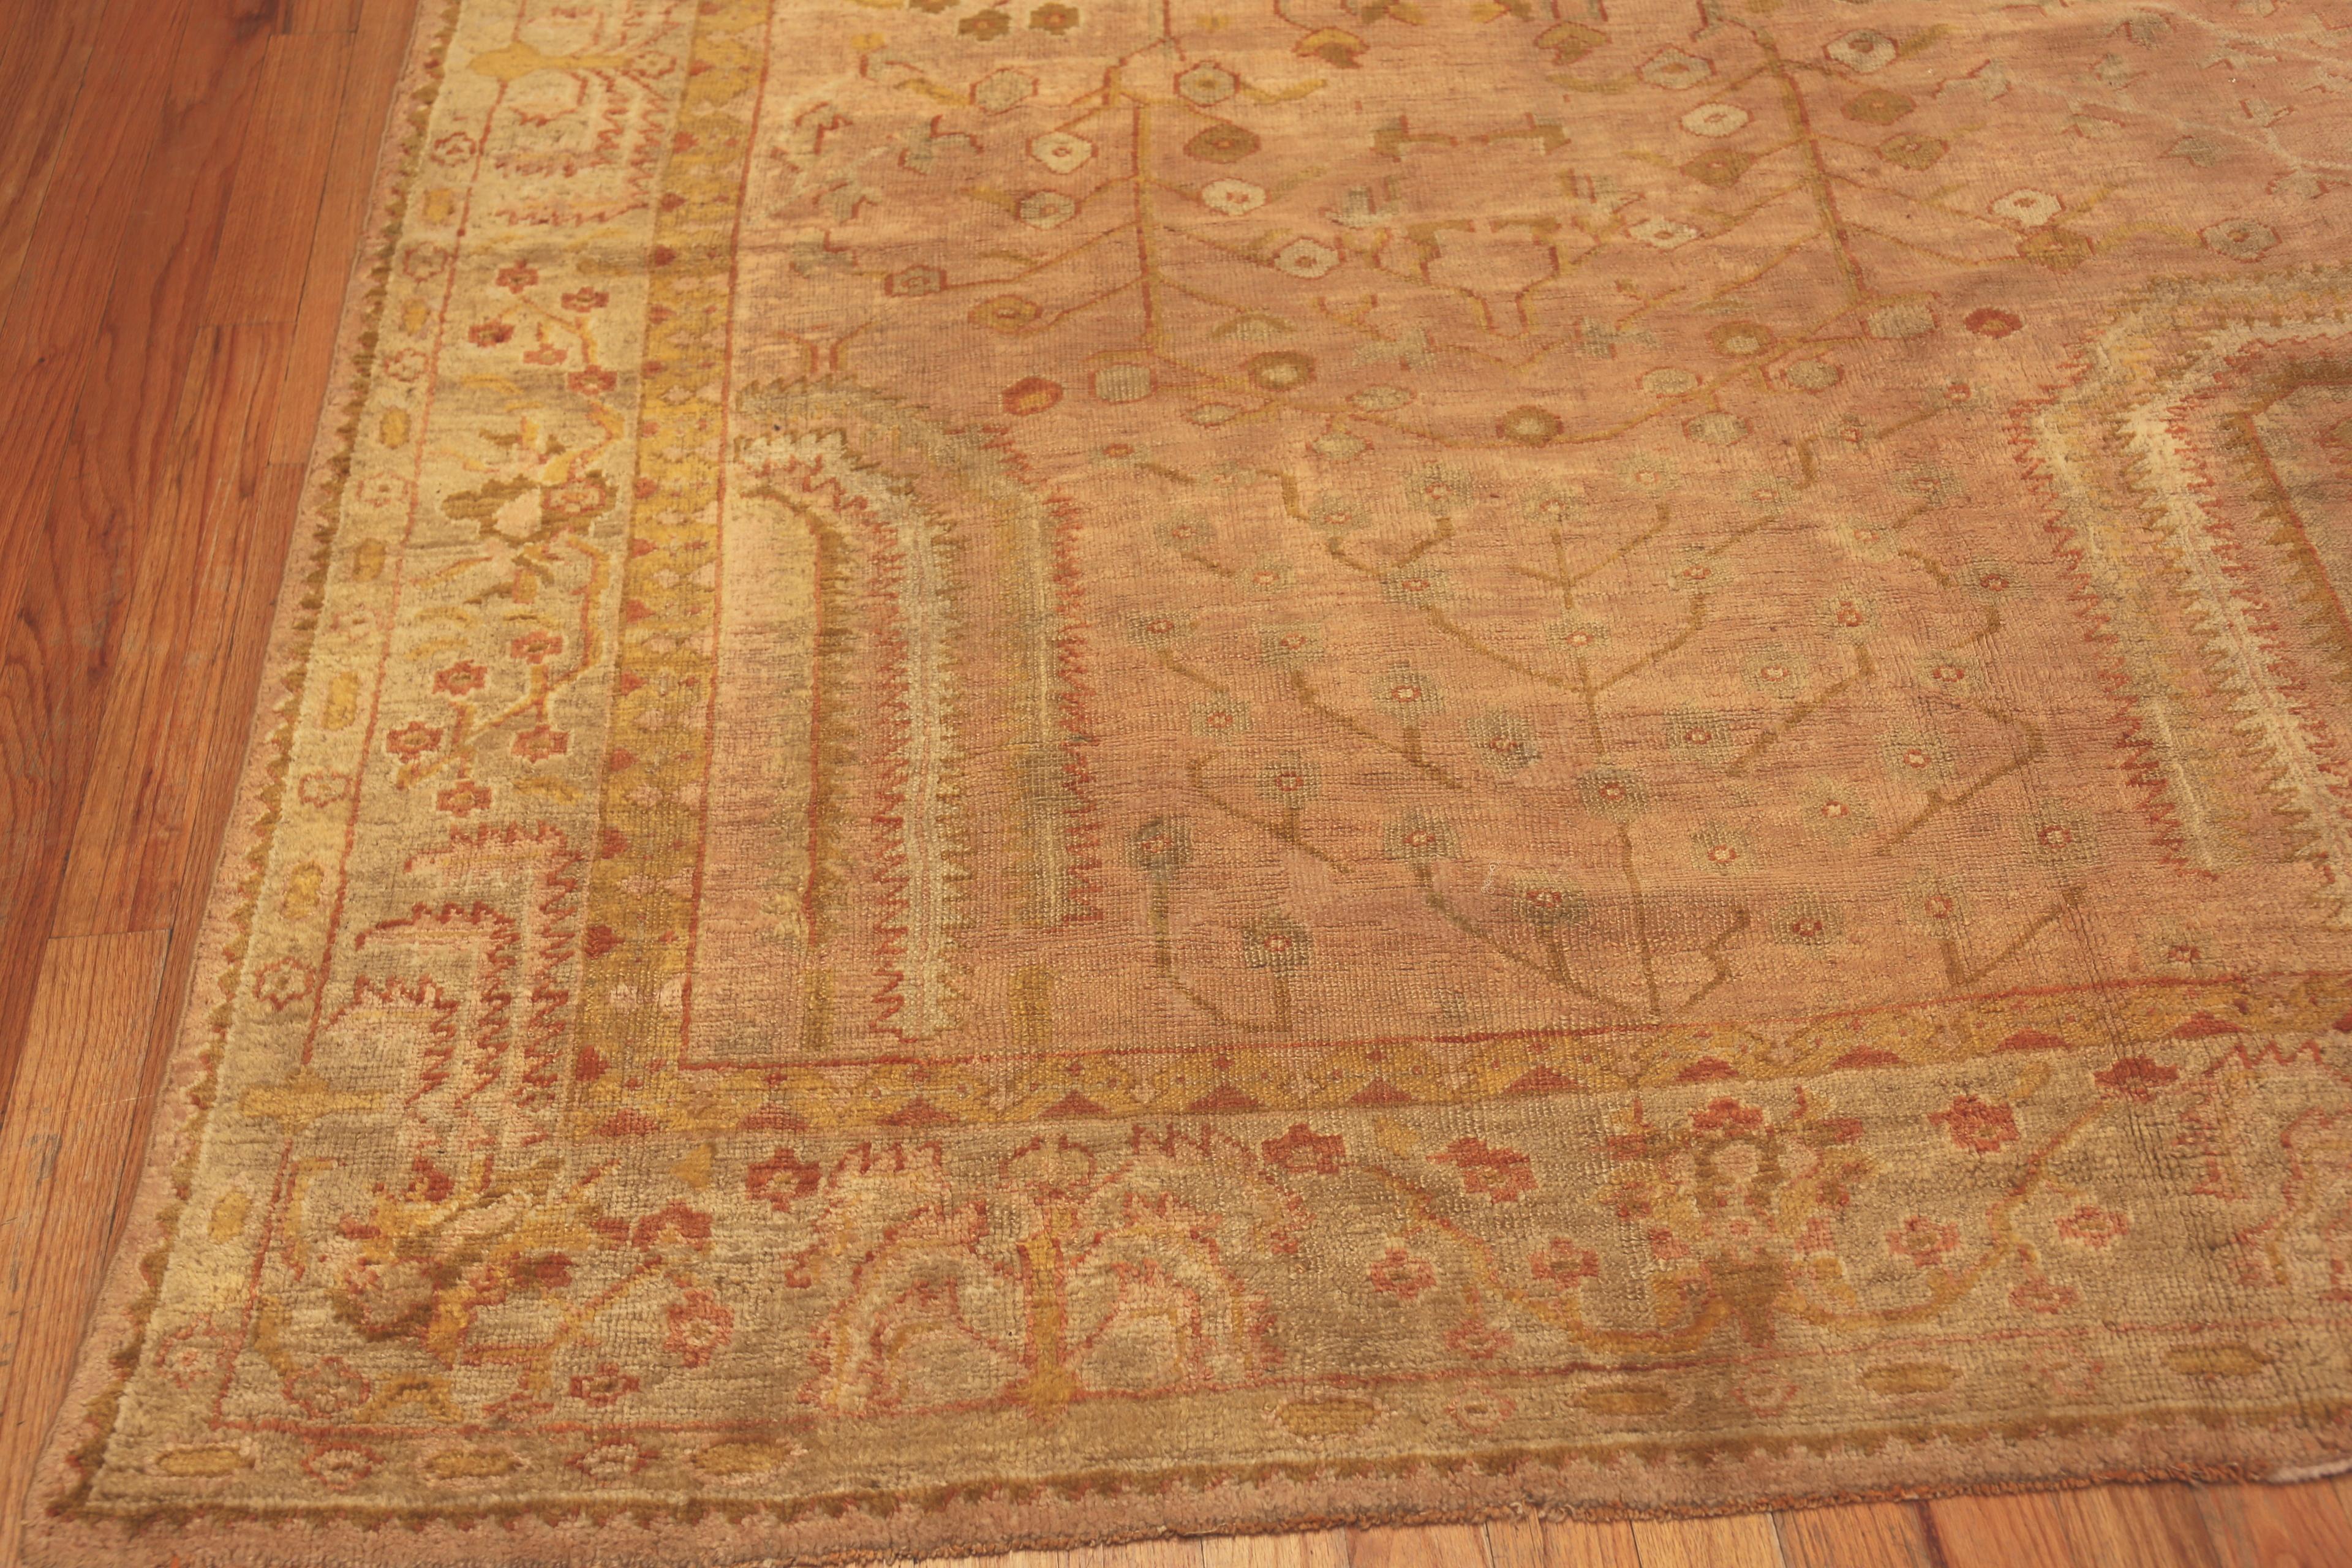 Hand-Knotted Antique Turkish Oushak Rug. 12 ft 9 in x 15 ft 10 in